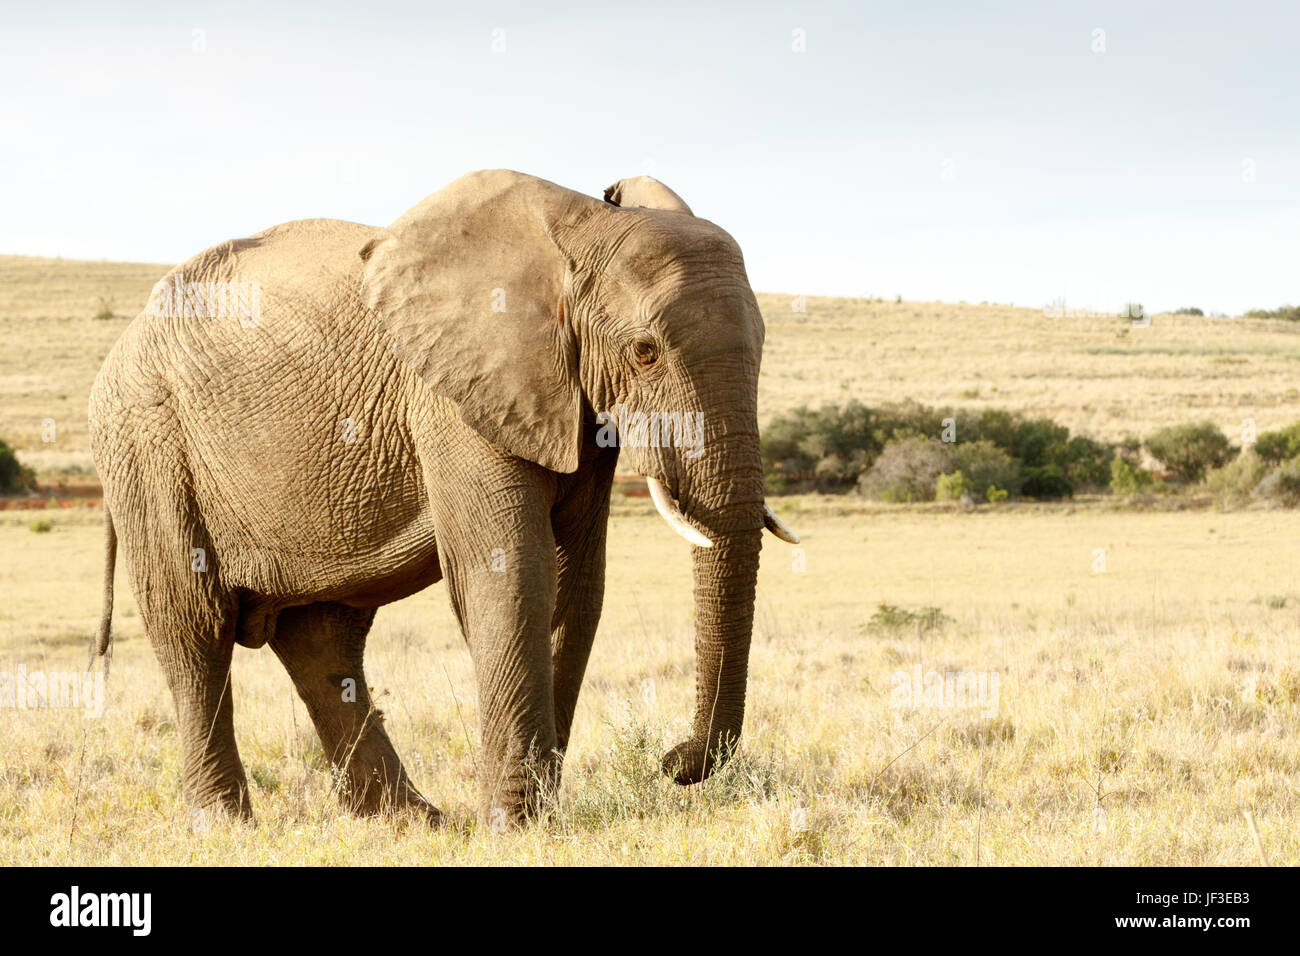 Just eating some dry grass - The African Bush Elephant Stock Photo